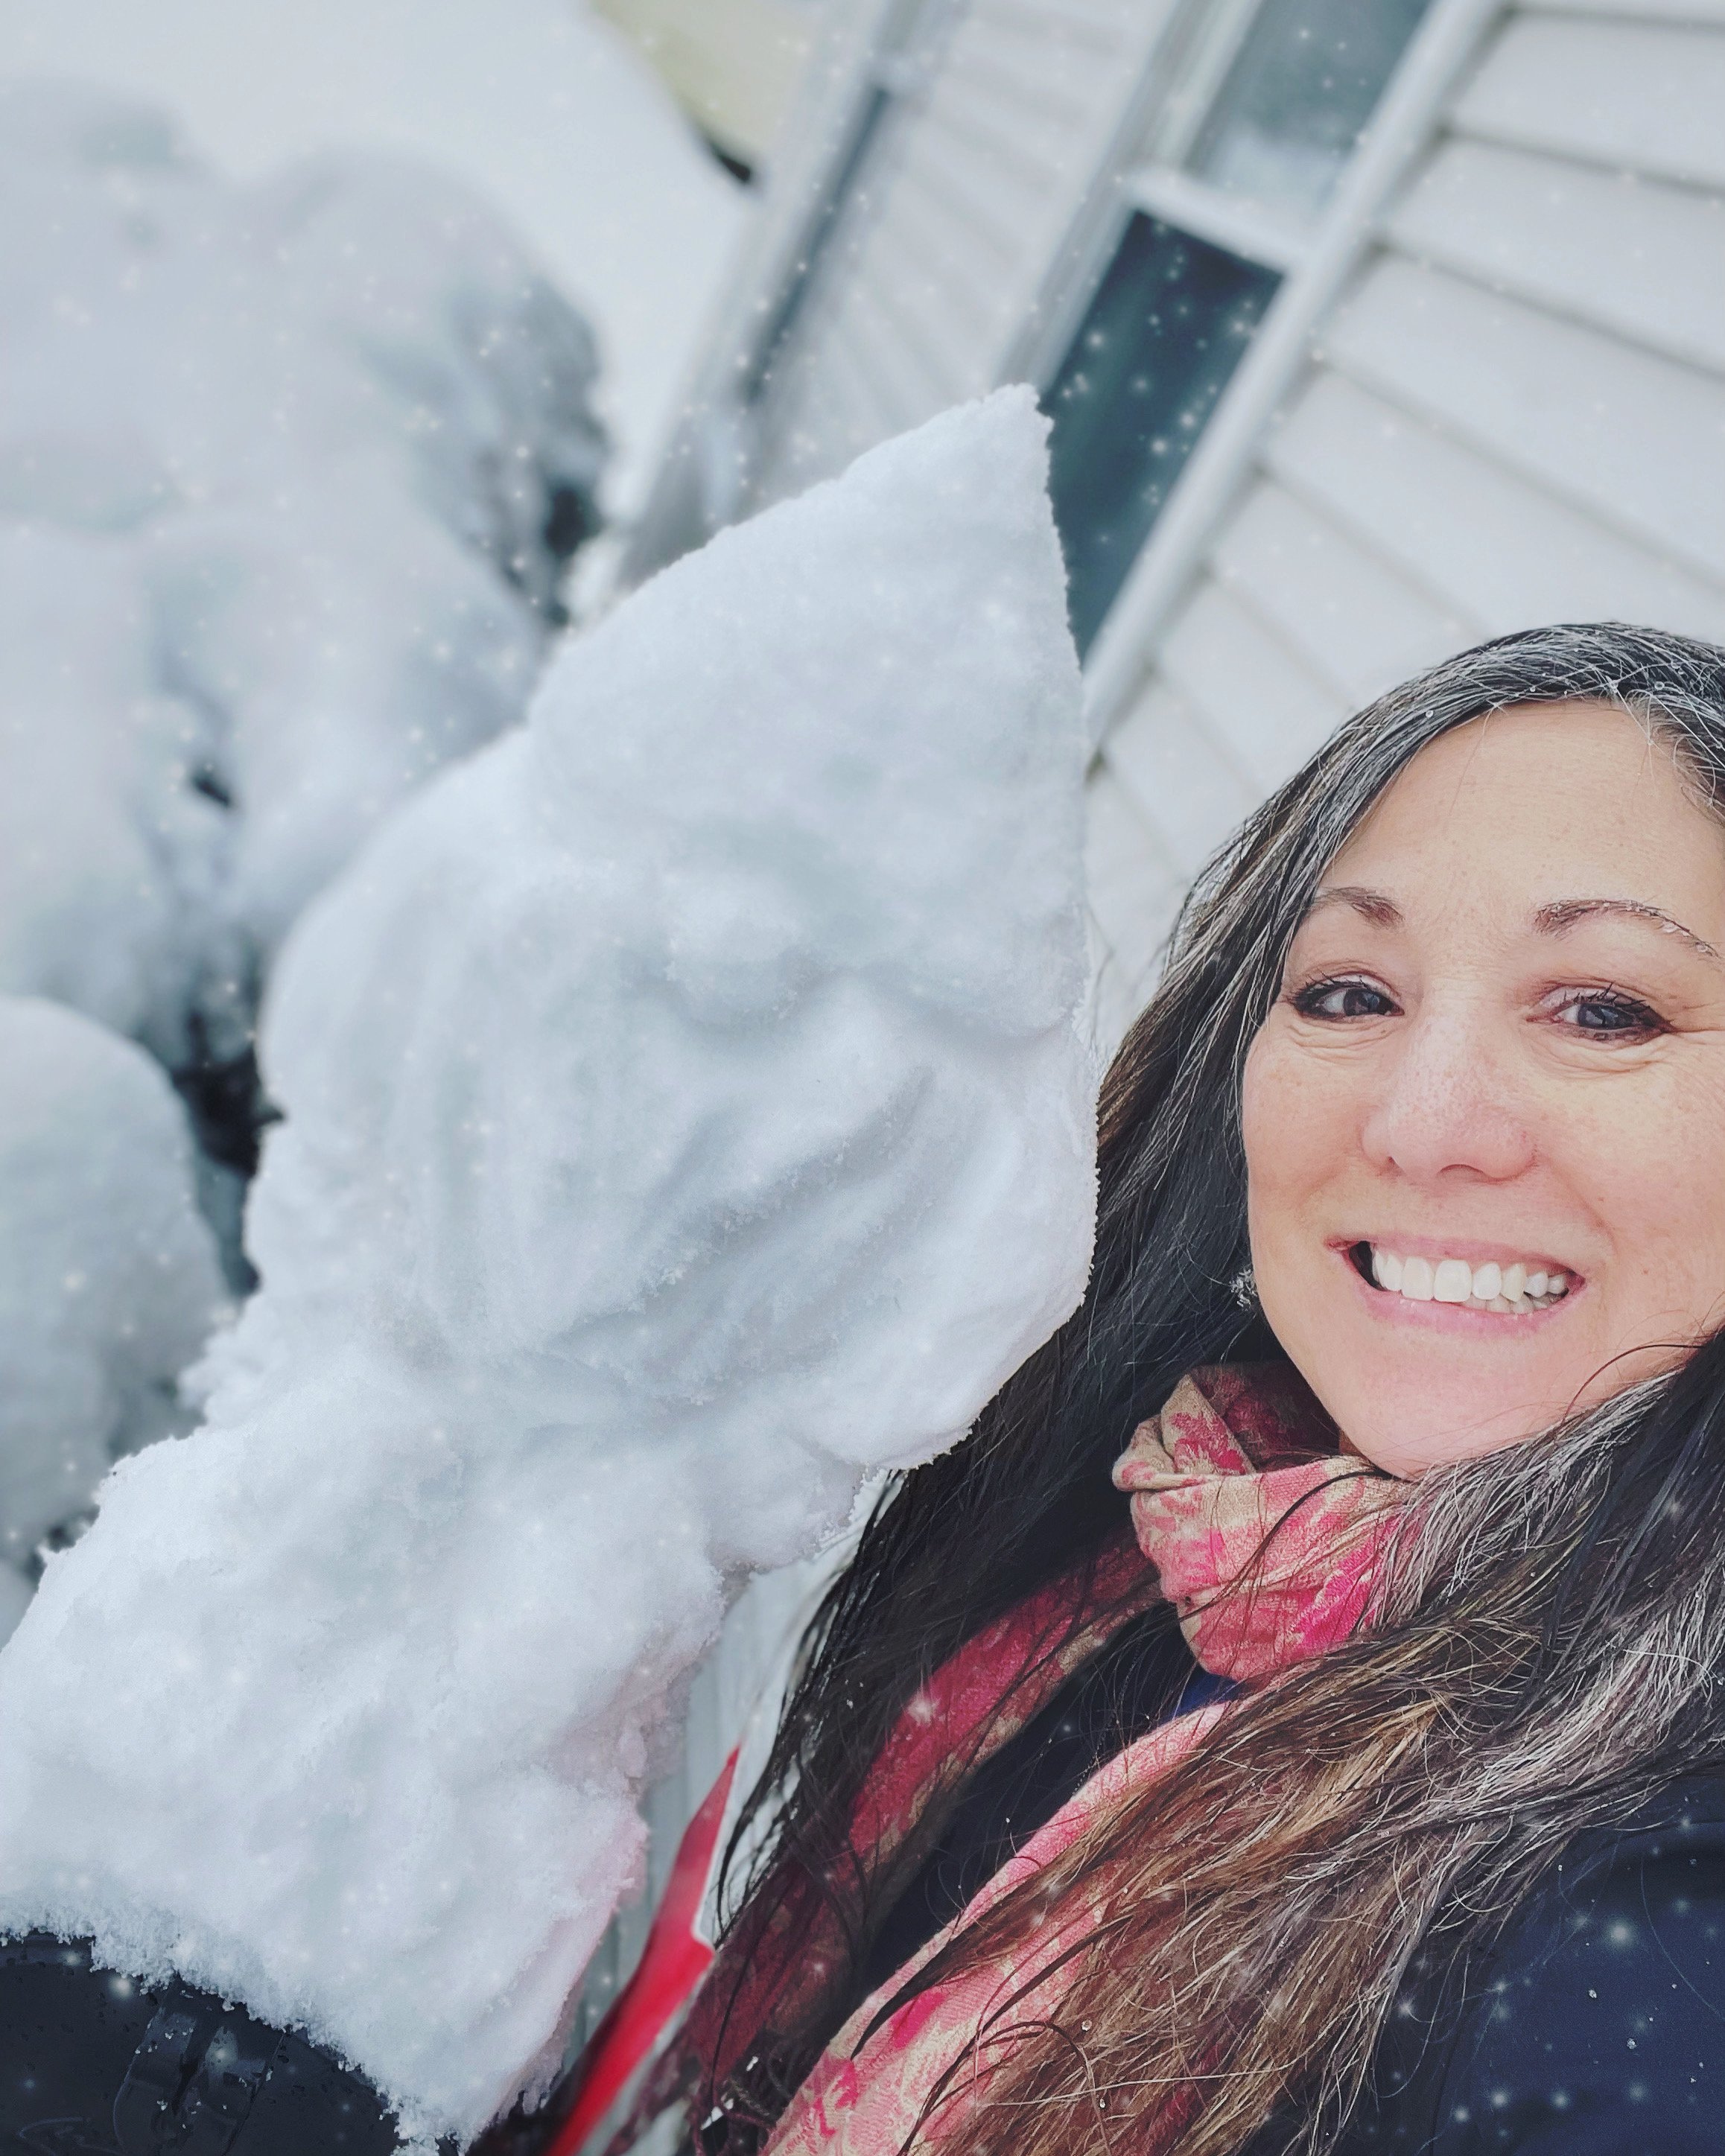   Rene Morse practices her snow-gnome skills. That's a mailbox it's sitting on.  